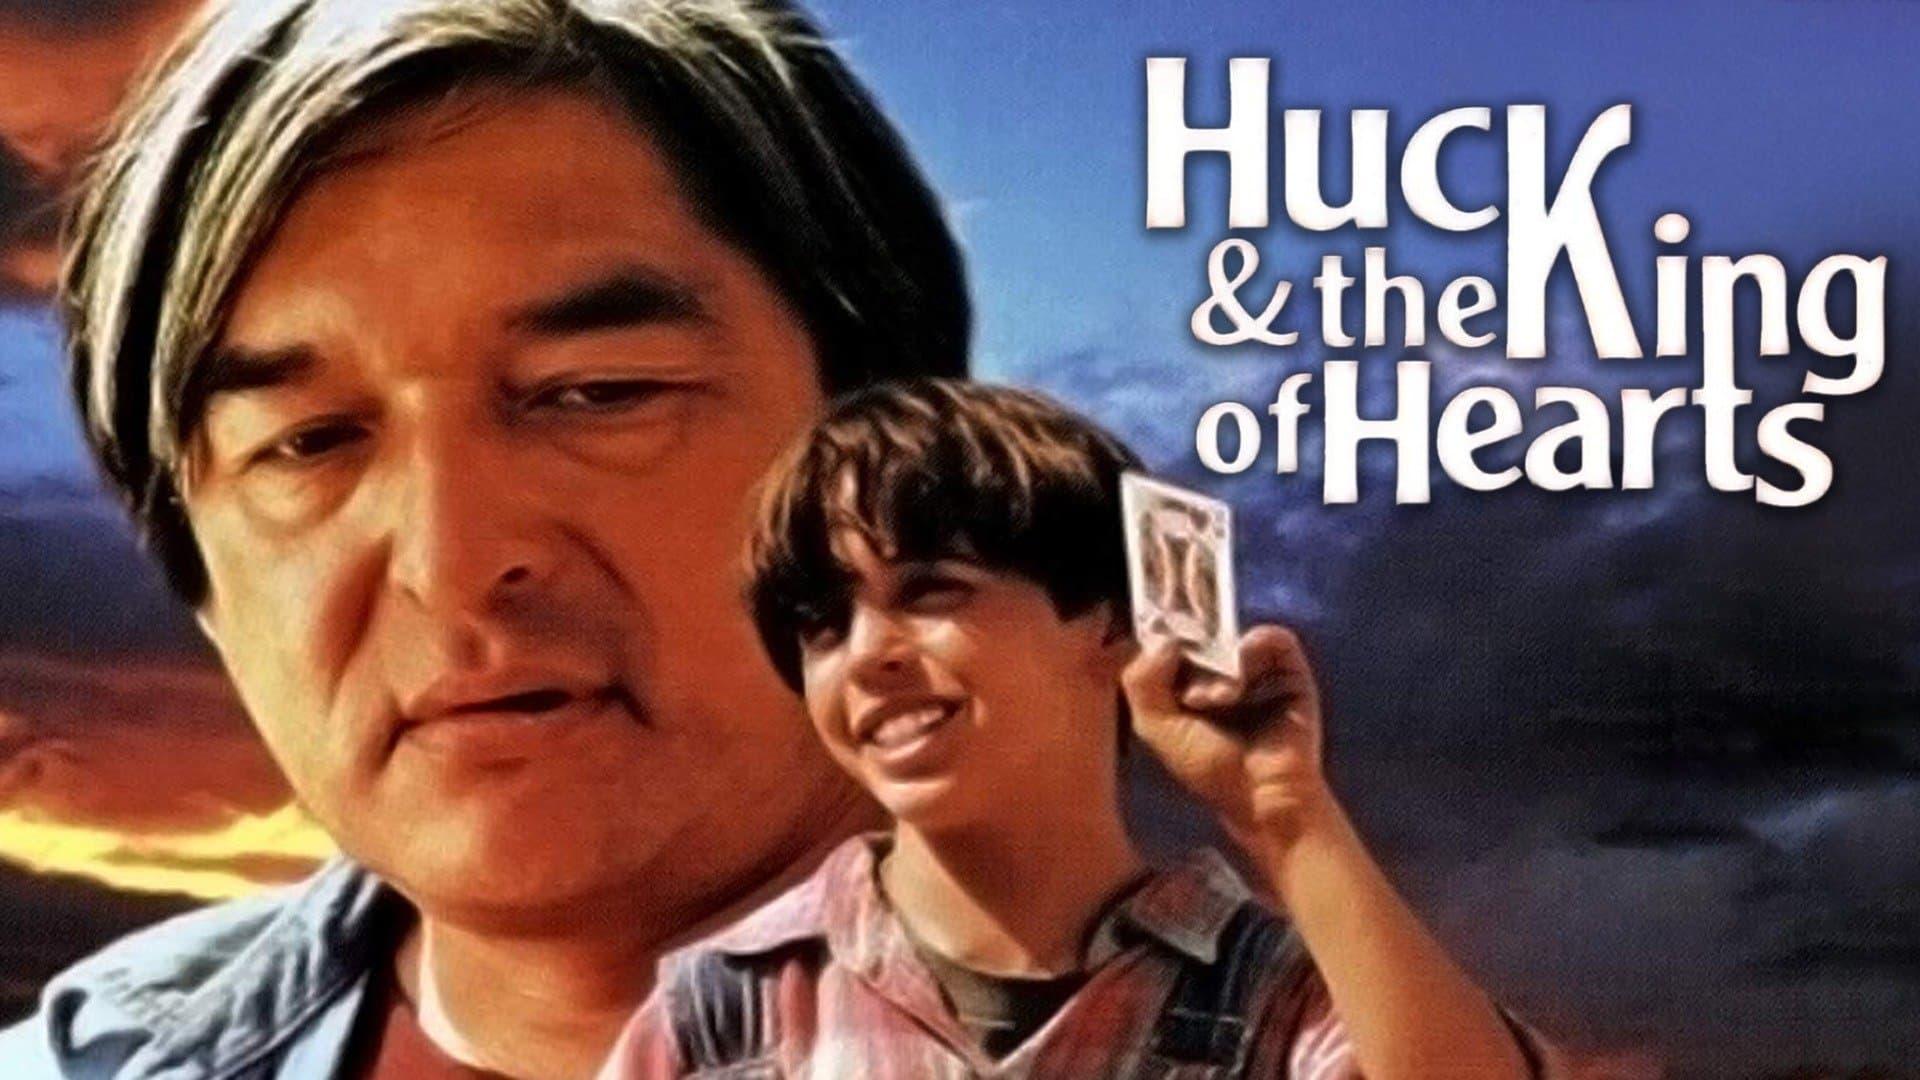 Huck and the King of Hearts backdrop